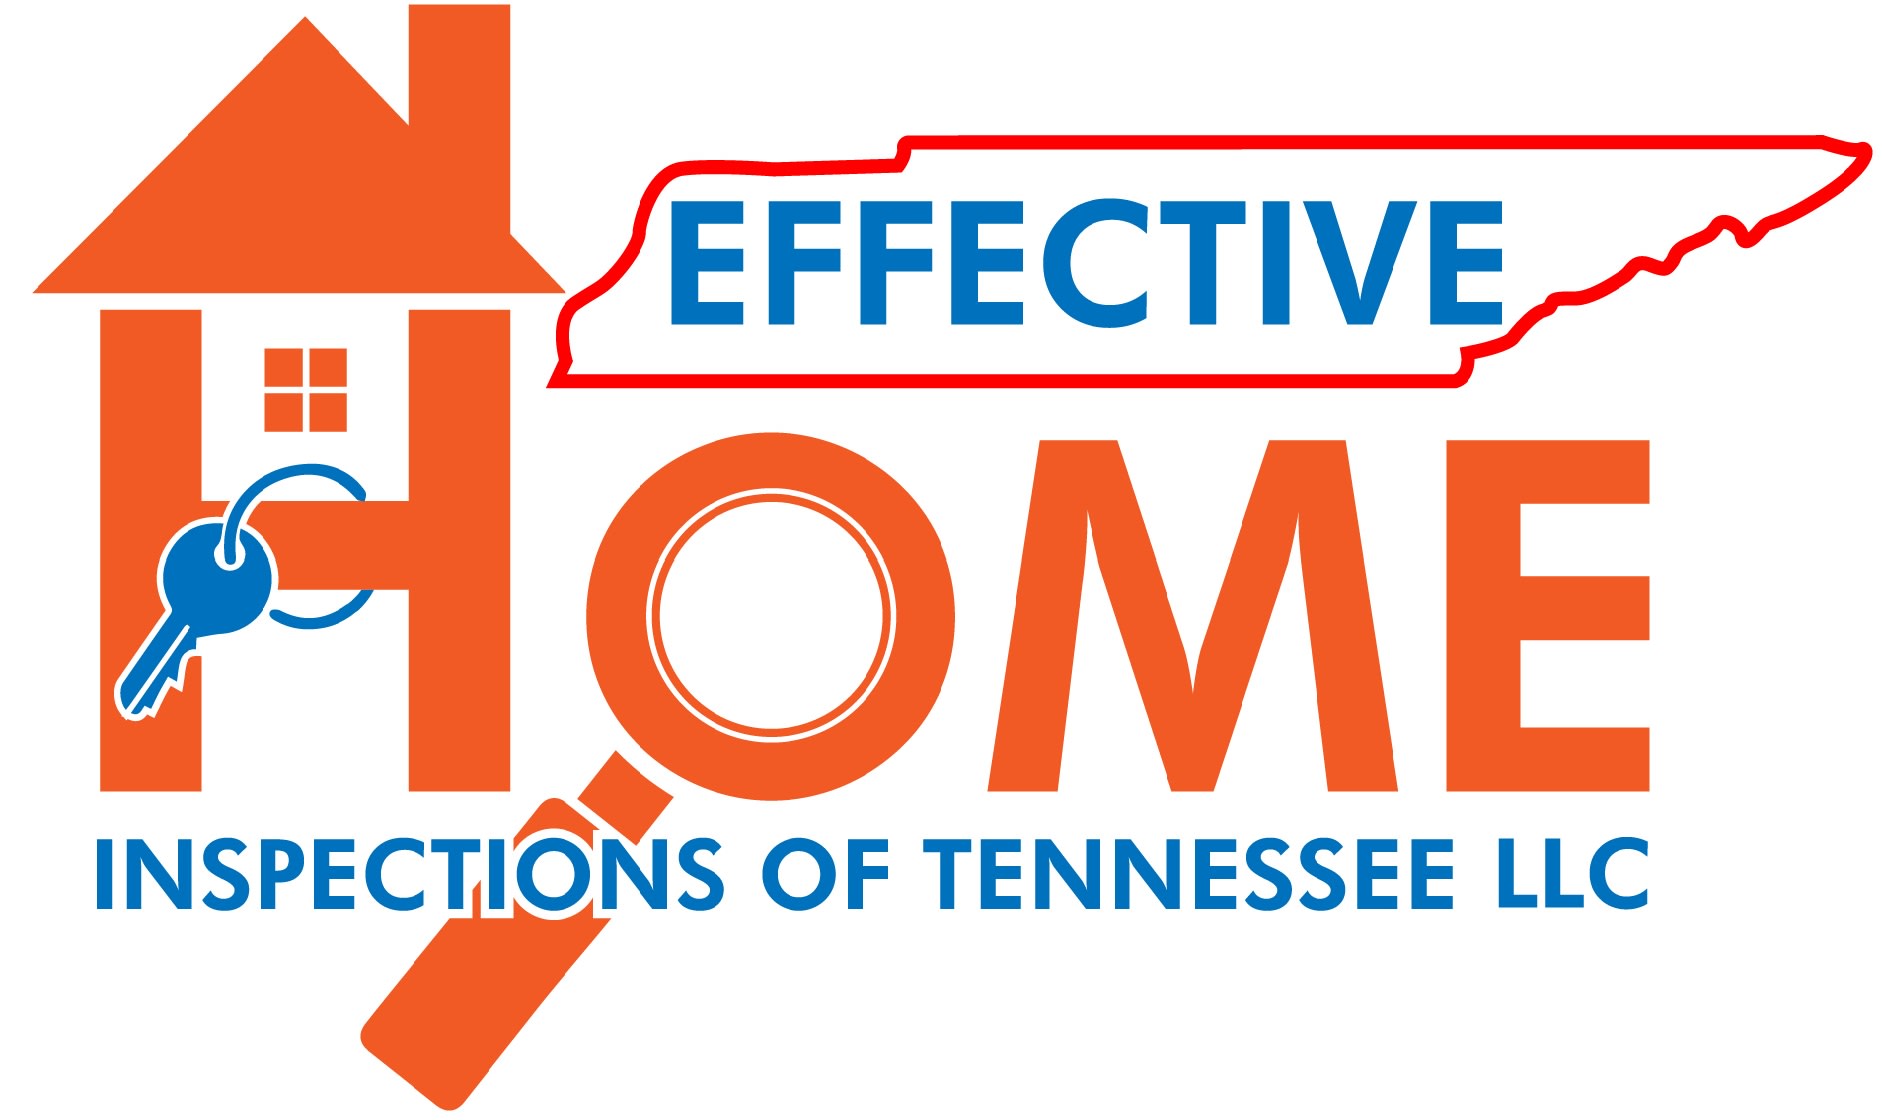 Effective Home Inspections of Tennessee LLC Logo